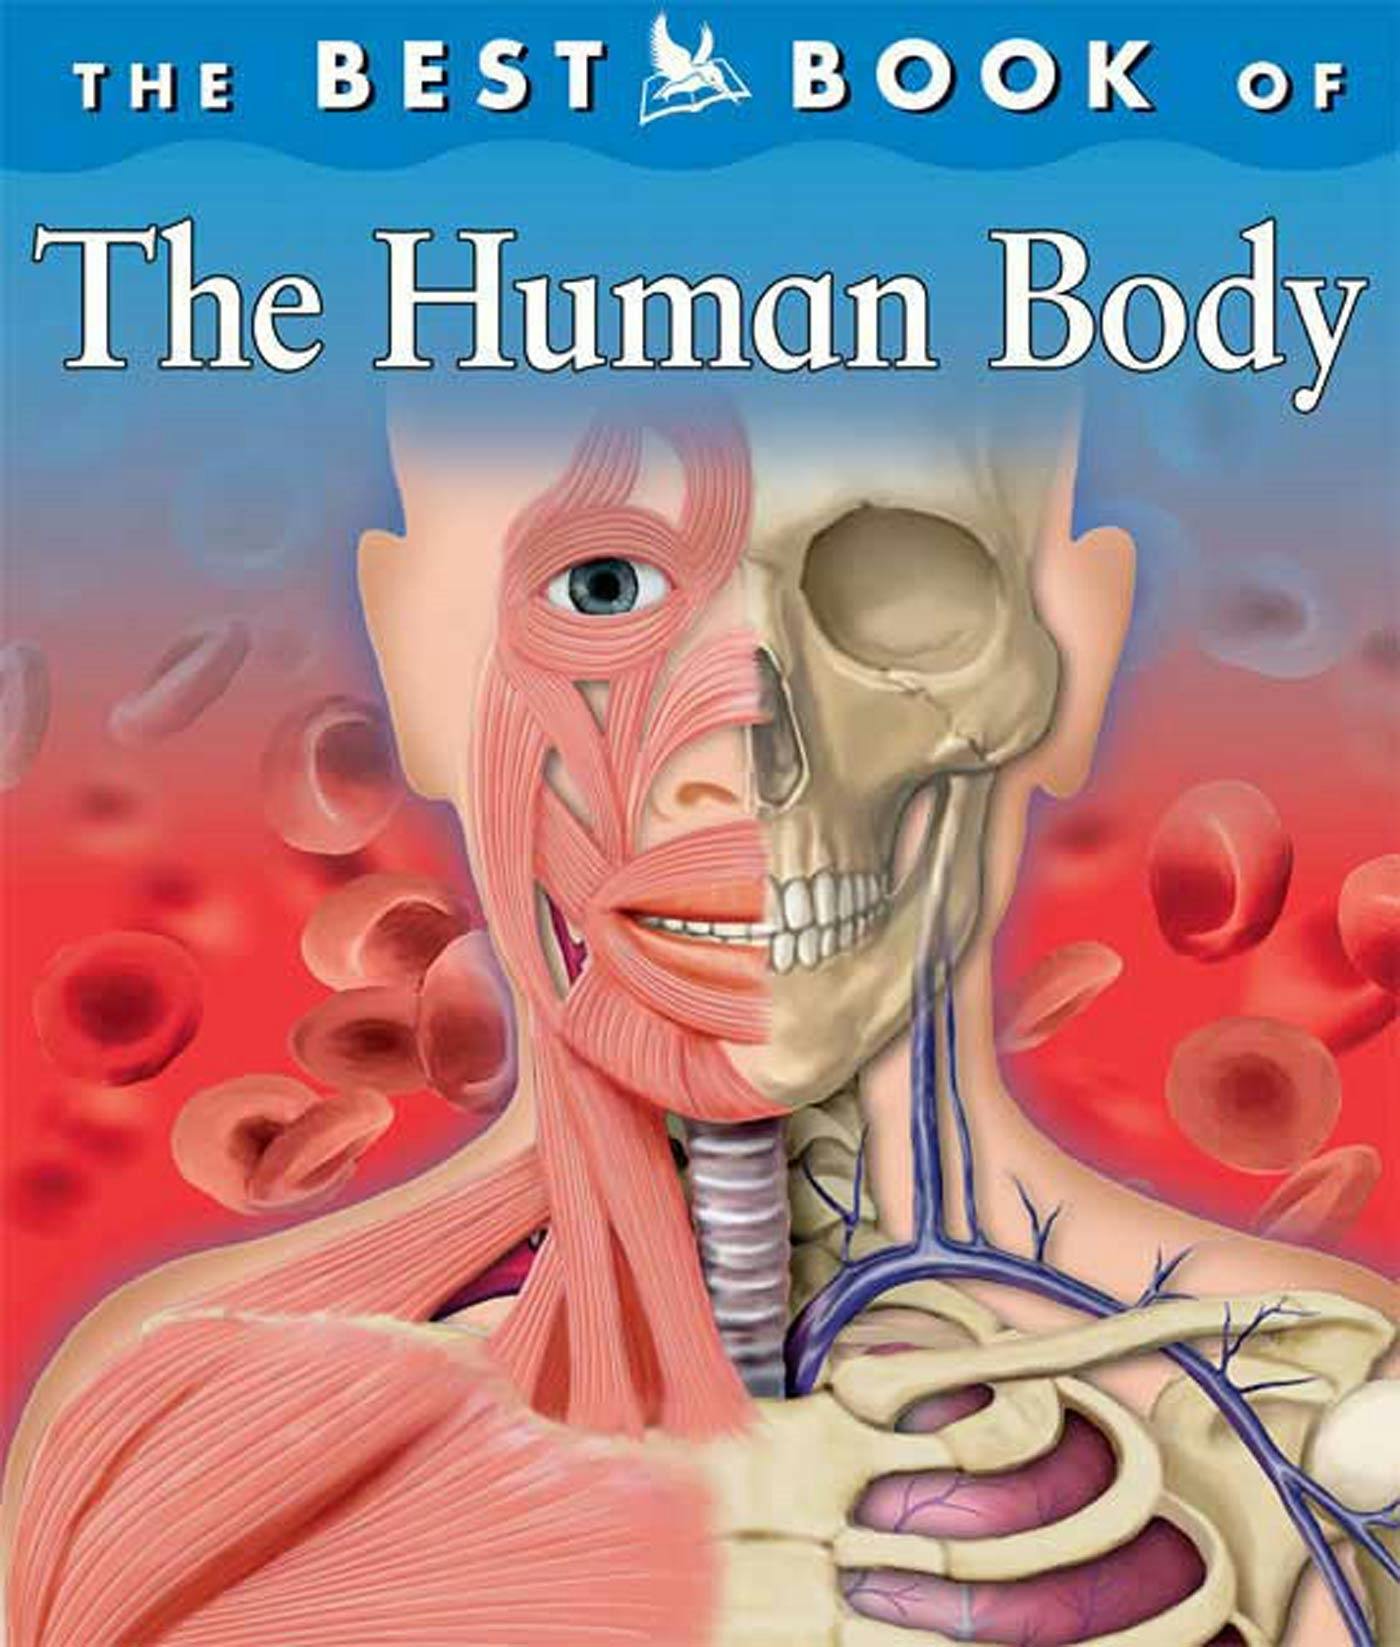 The Best Book of the Human Body